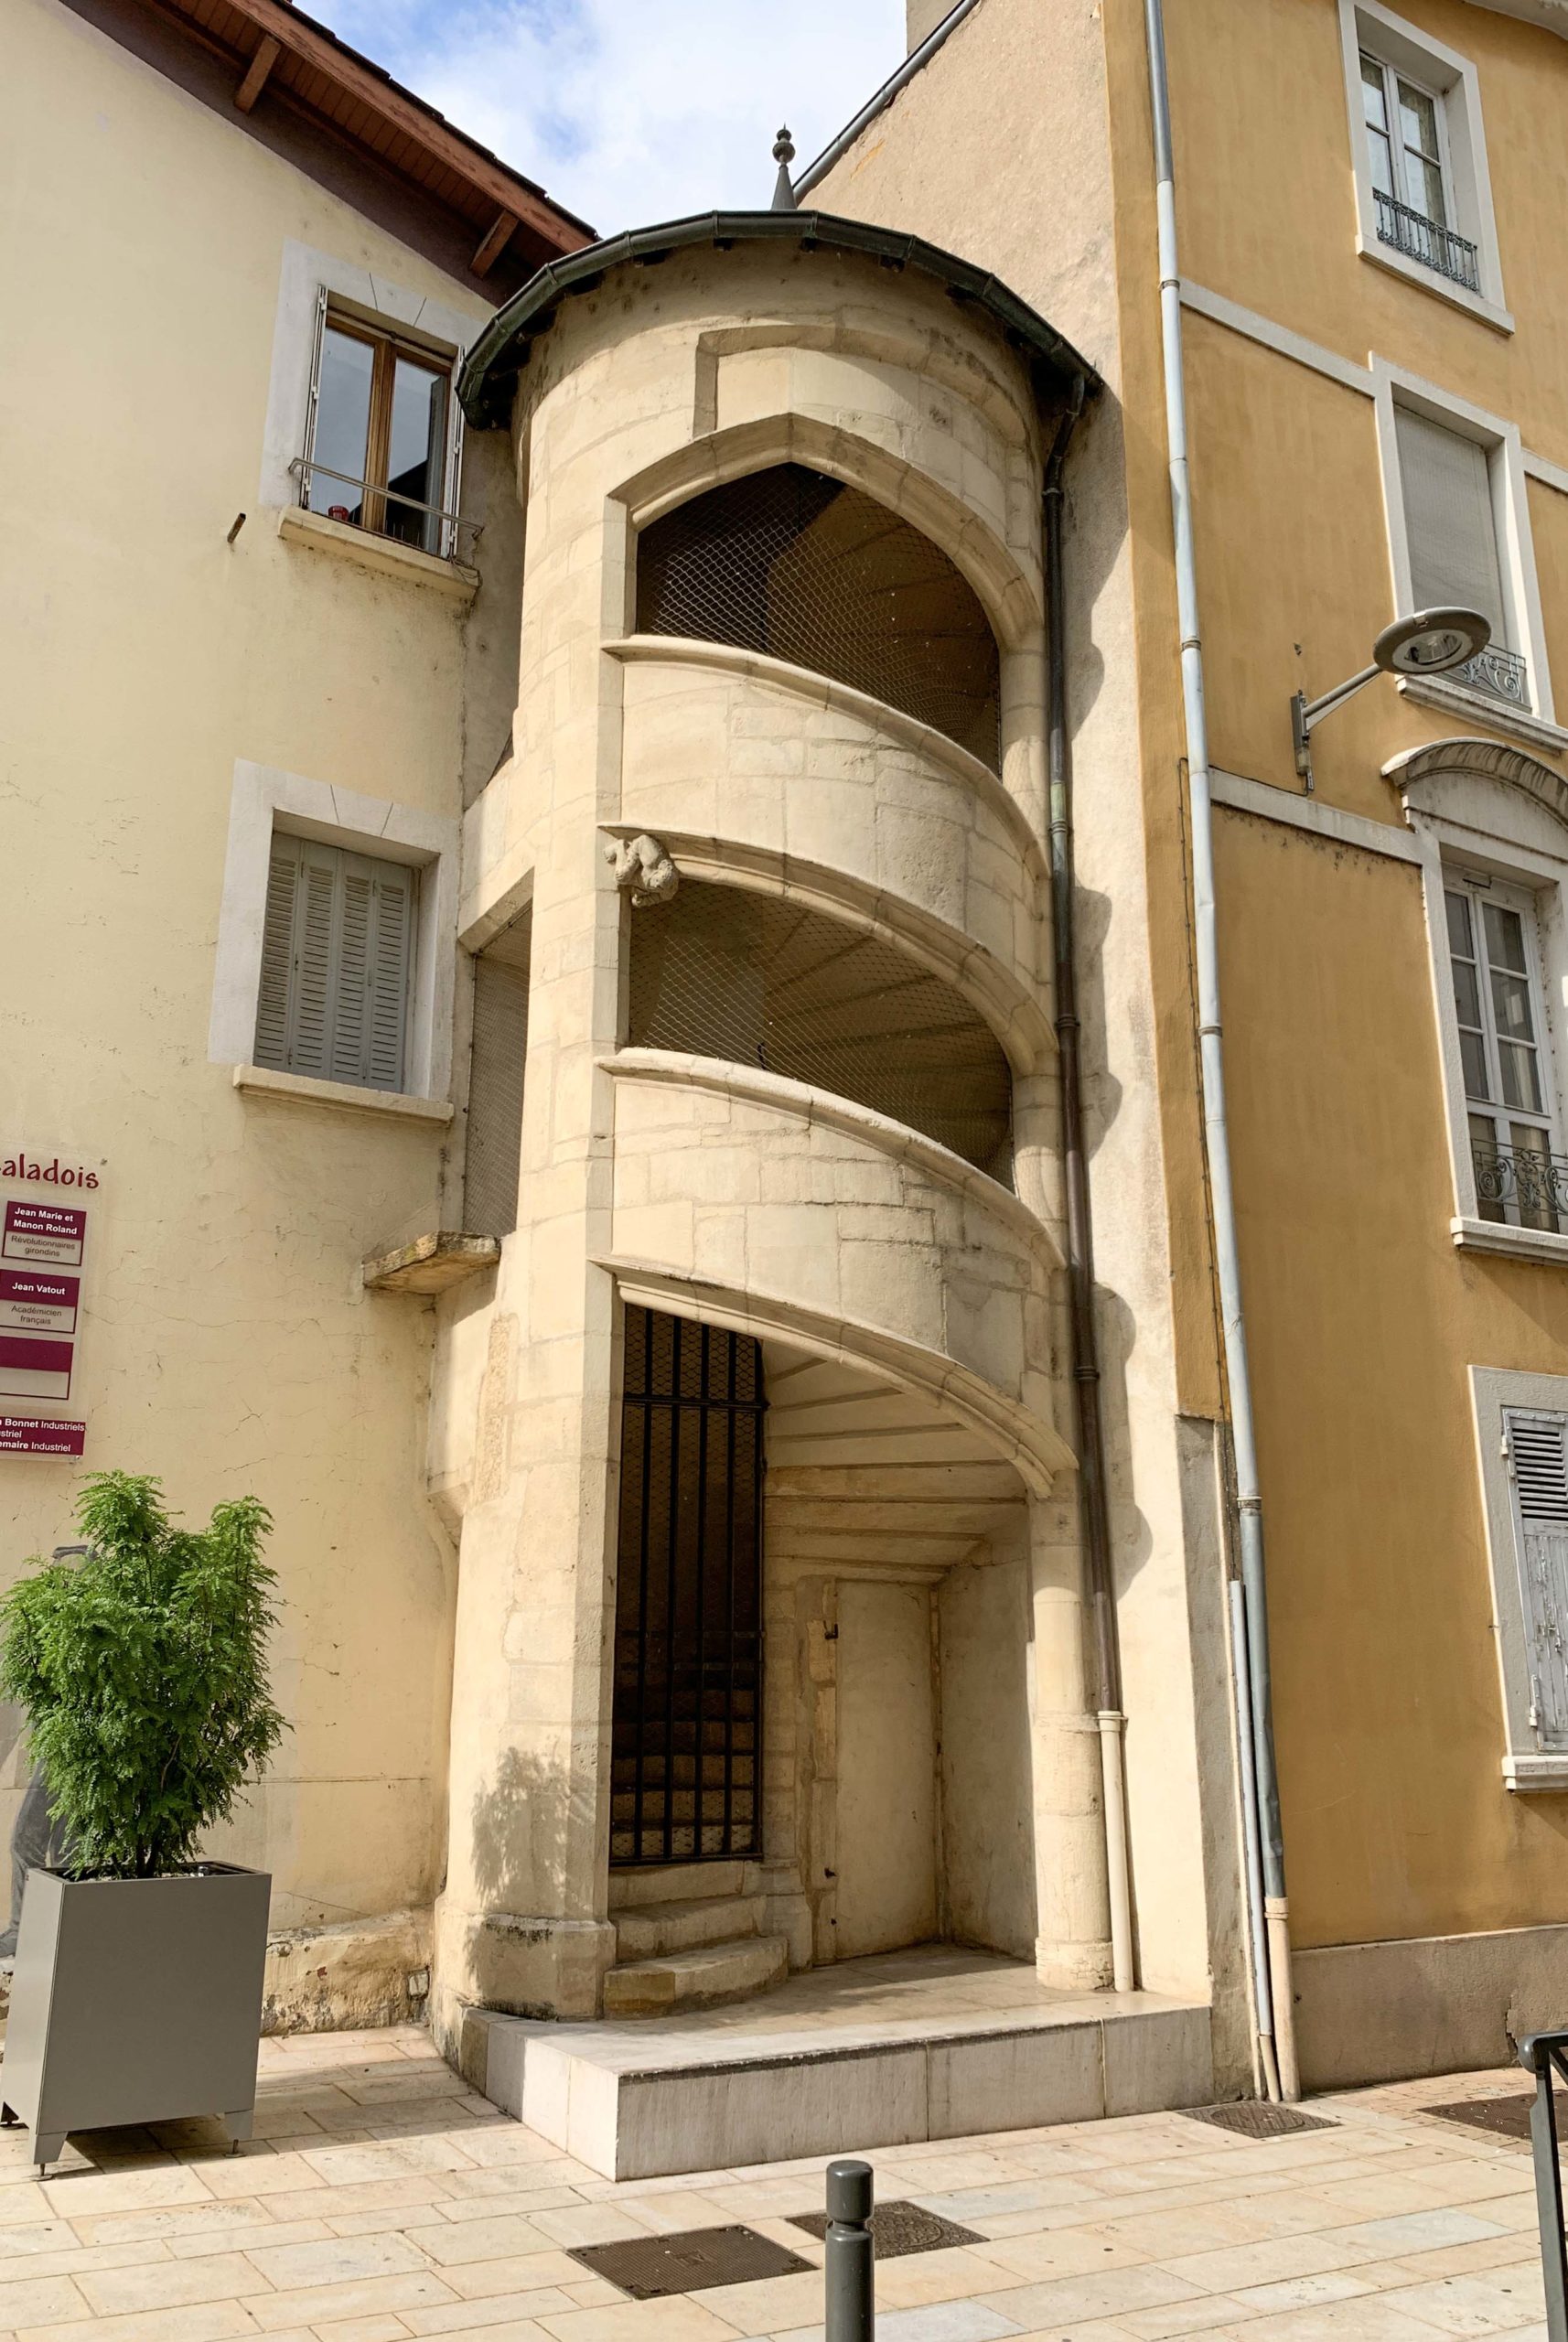 Renaissance staircase, Cr Rue Nationale and Rue Grenette © Chabe01 - licence [CC BY-SA 4.0] from Wikimedia Commons